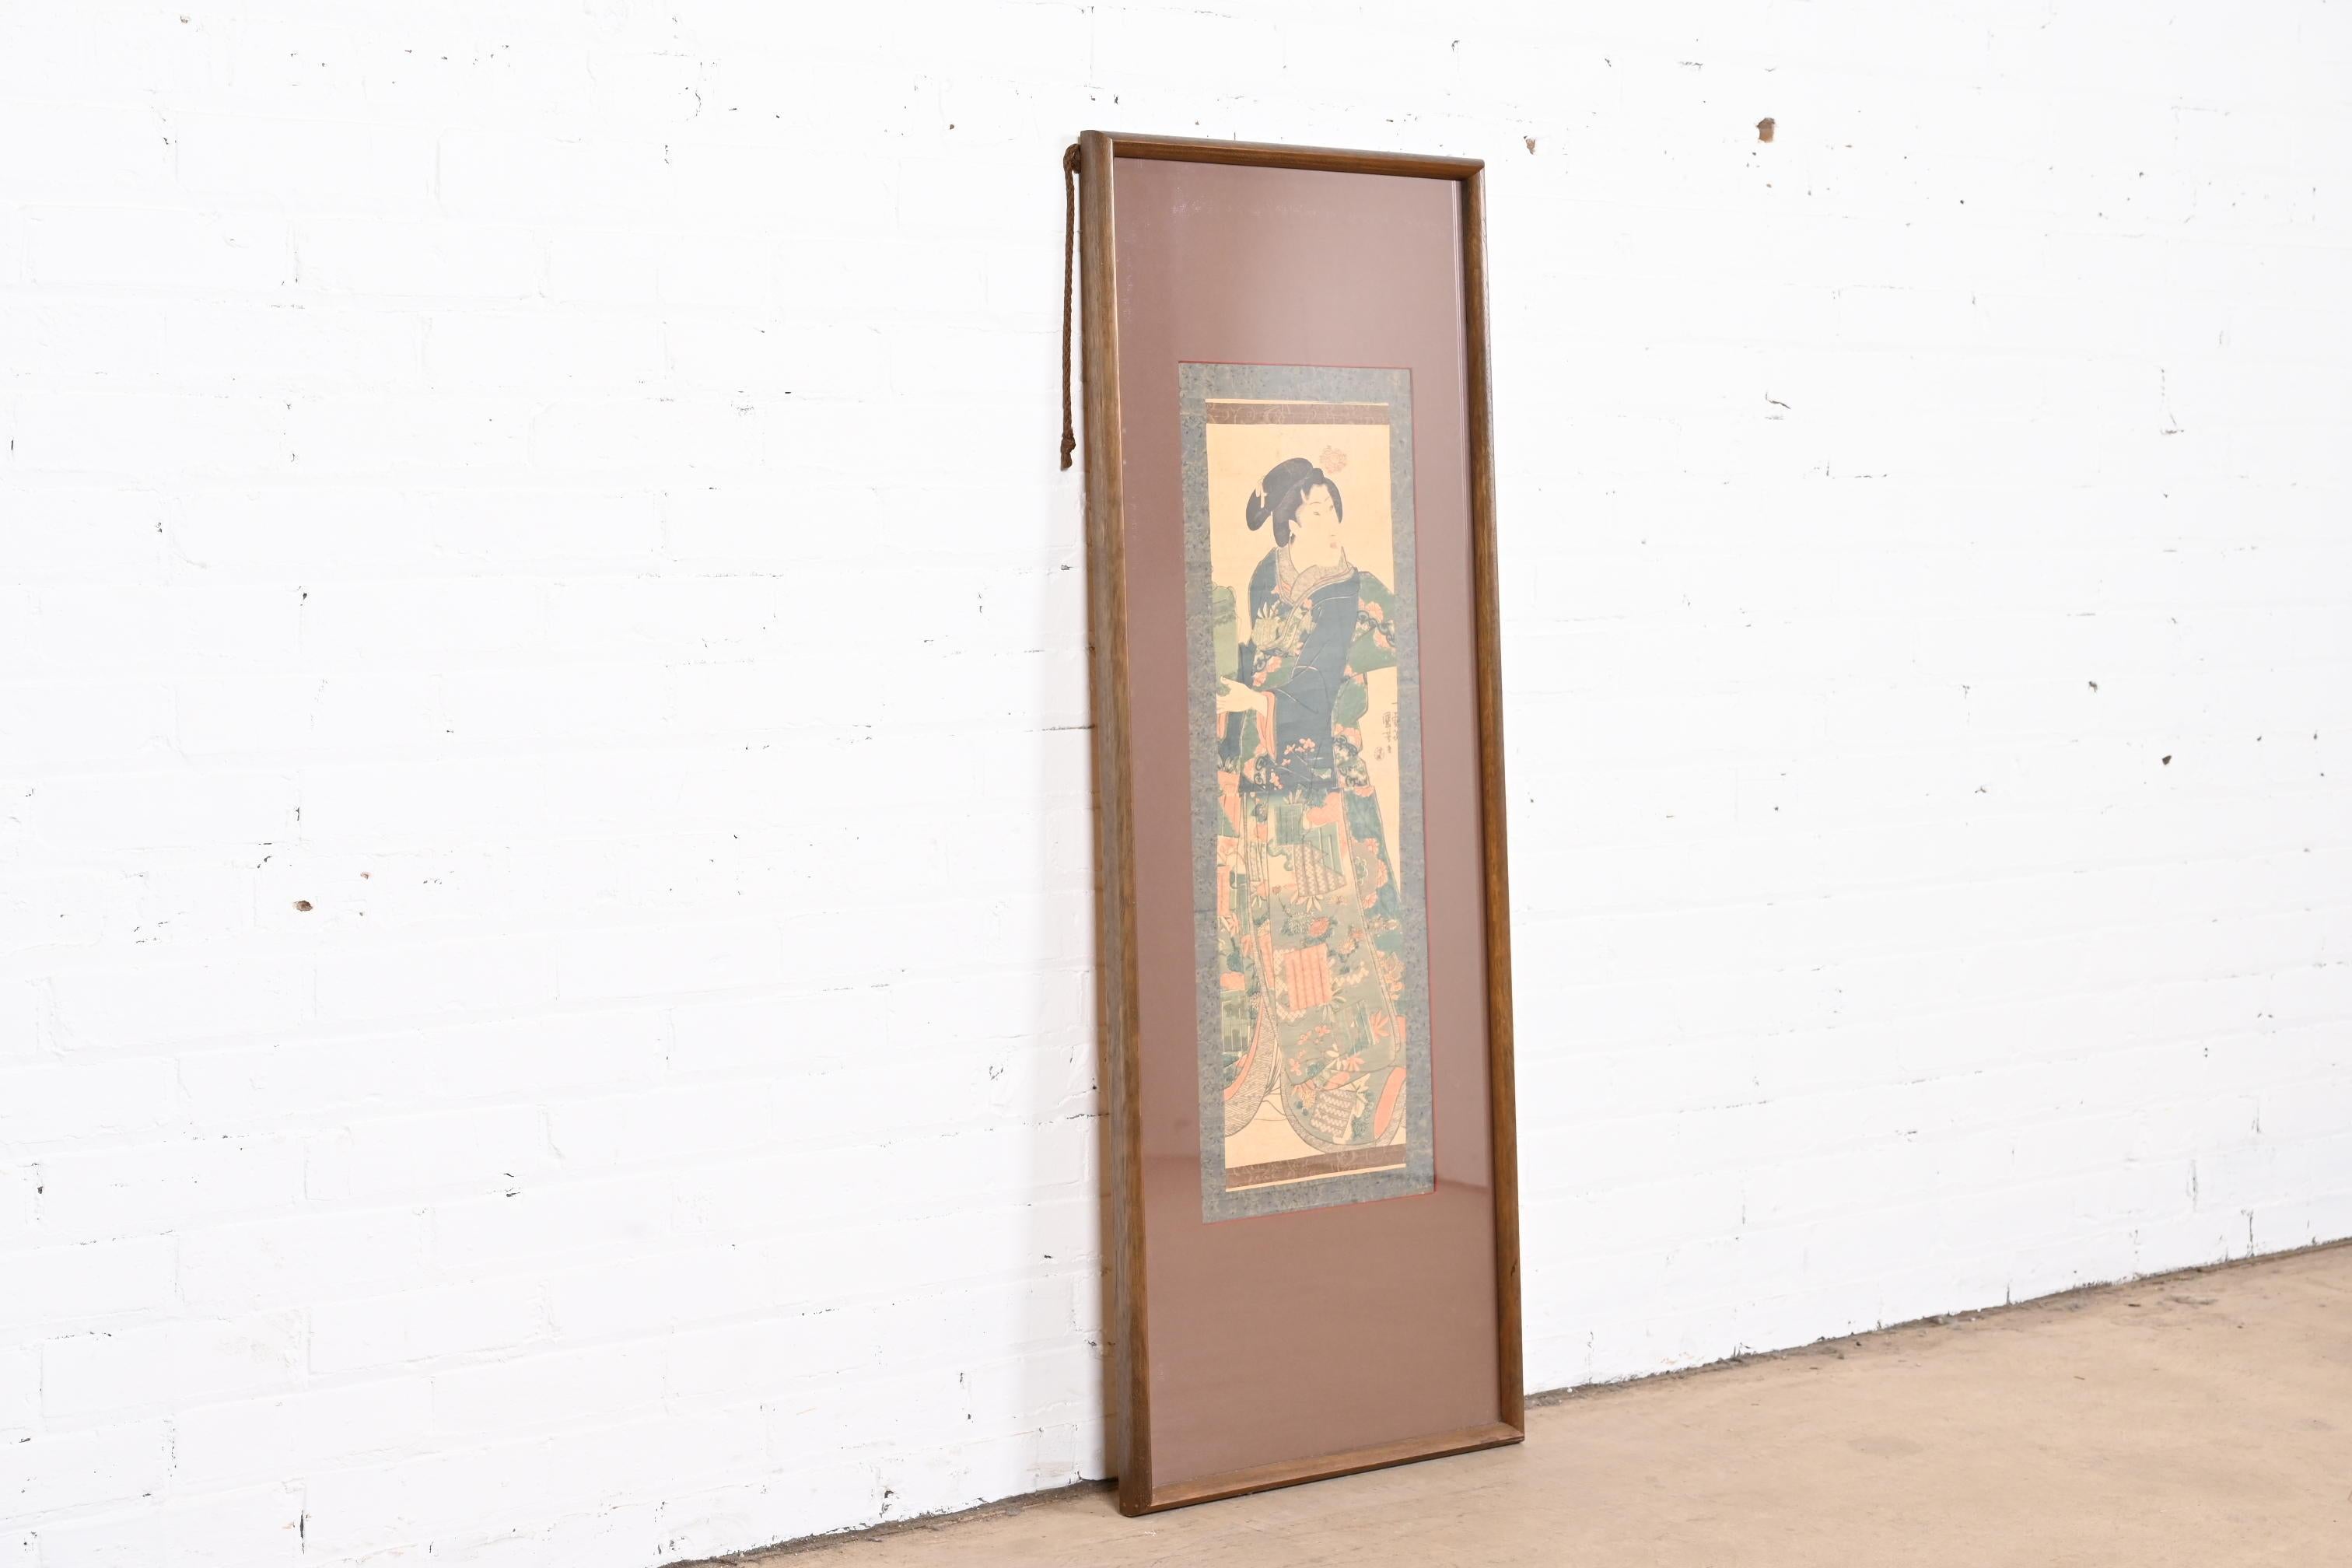 20th Century Japanese Scroll Painting of Woman From Frank Lloyd Wright's DeRhode's House